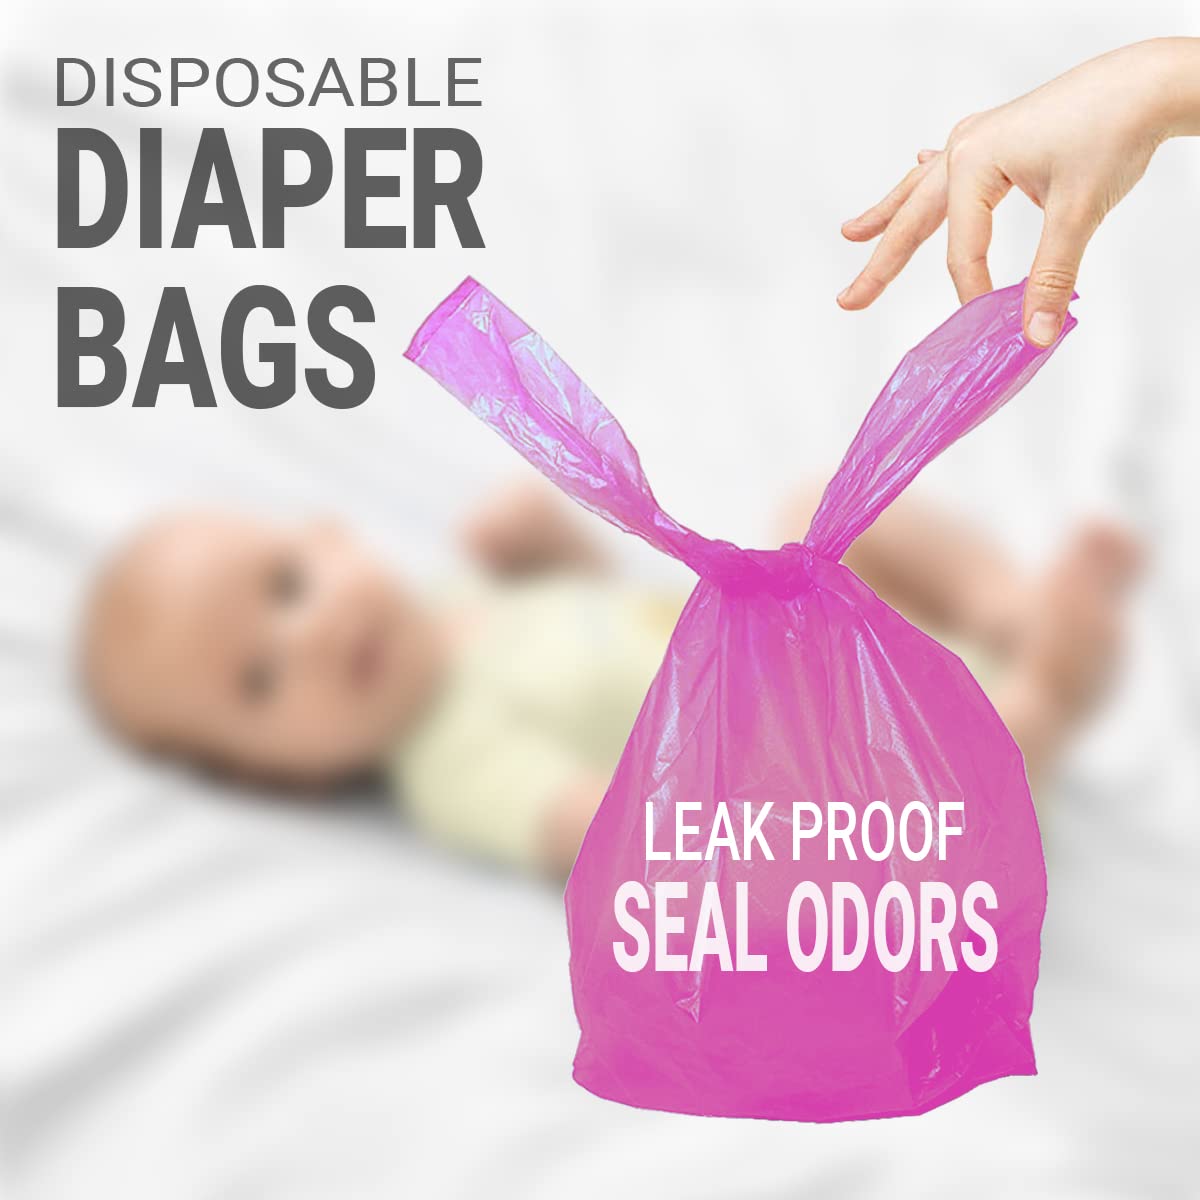 Baby Disposable Plastic Diaper Bags 1000 Count (500 Lavender Scent, 500 Fresh Baby Powder Scent) Easy Tie Handles Diaper Sacks or Pet Waste Bags (1000 Bags)